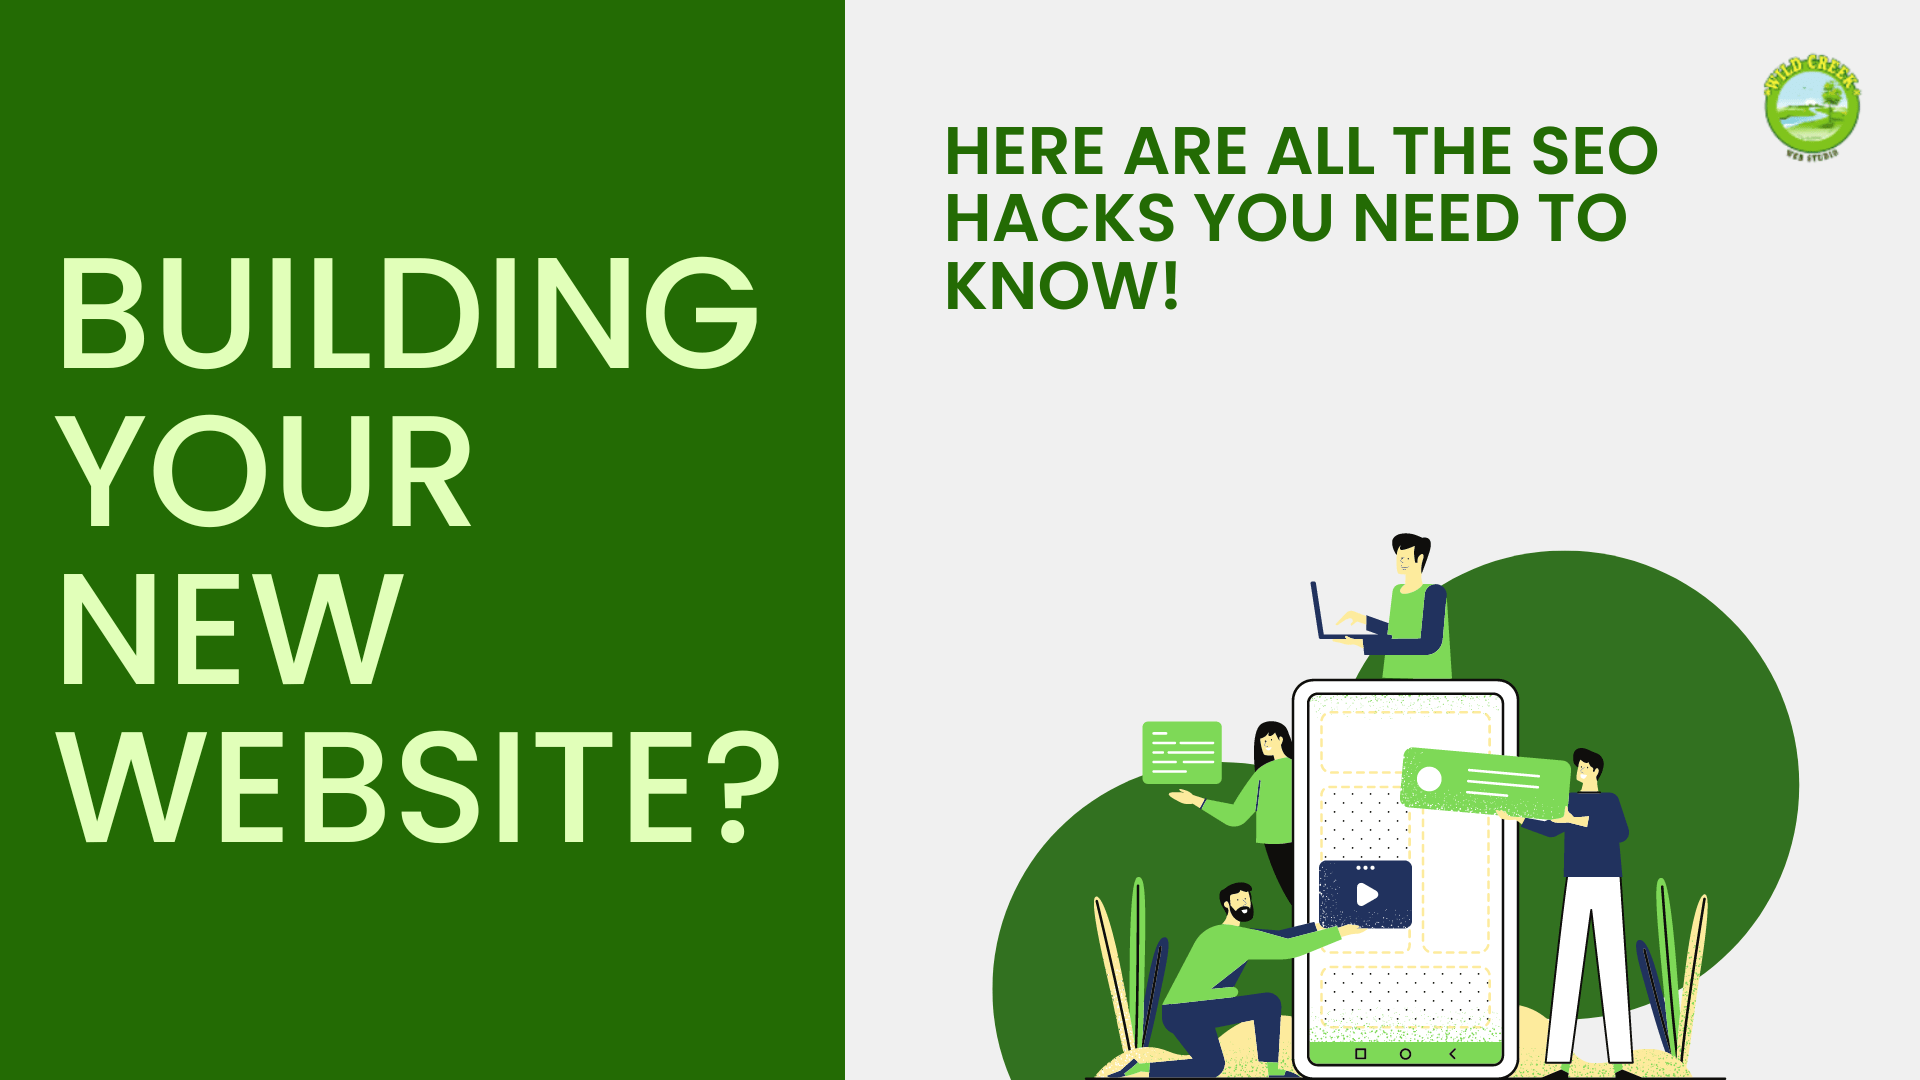 Building Your New Website? Here are All the SEO Hacks You Need to Know!